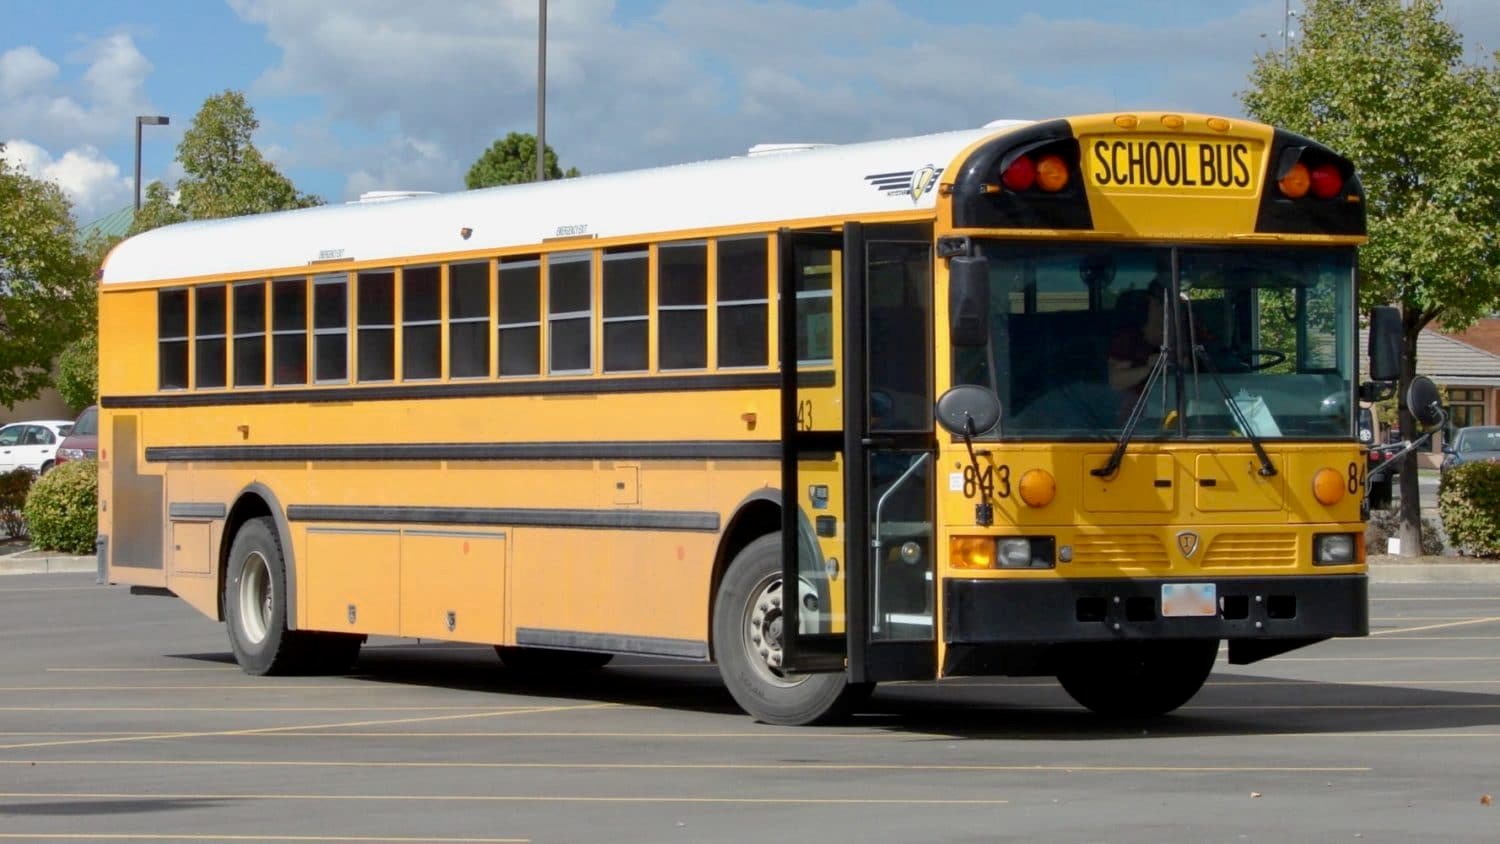 Rhode Island News: Press Release: More school bus workers join Teamsters Local 251